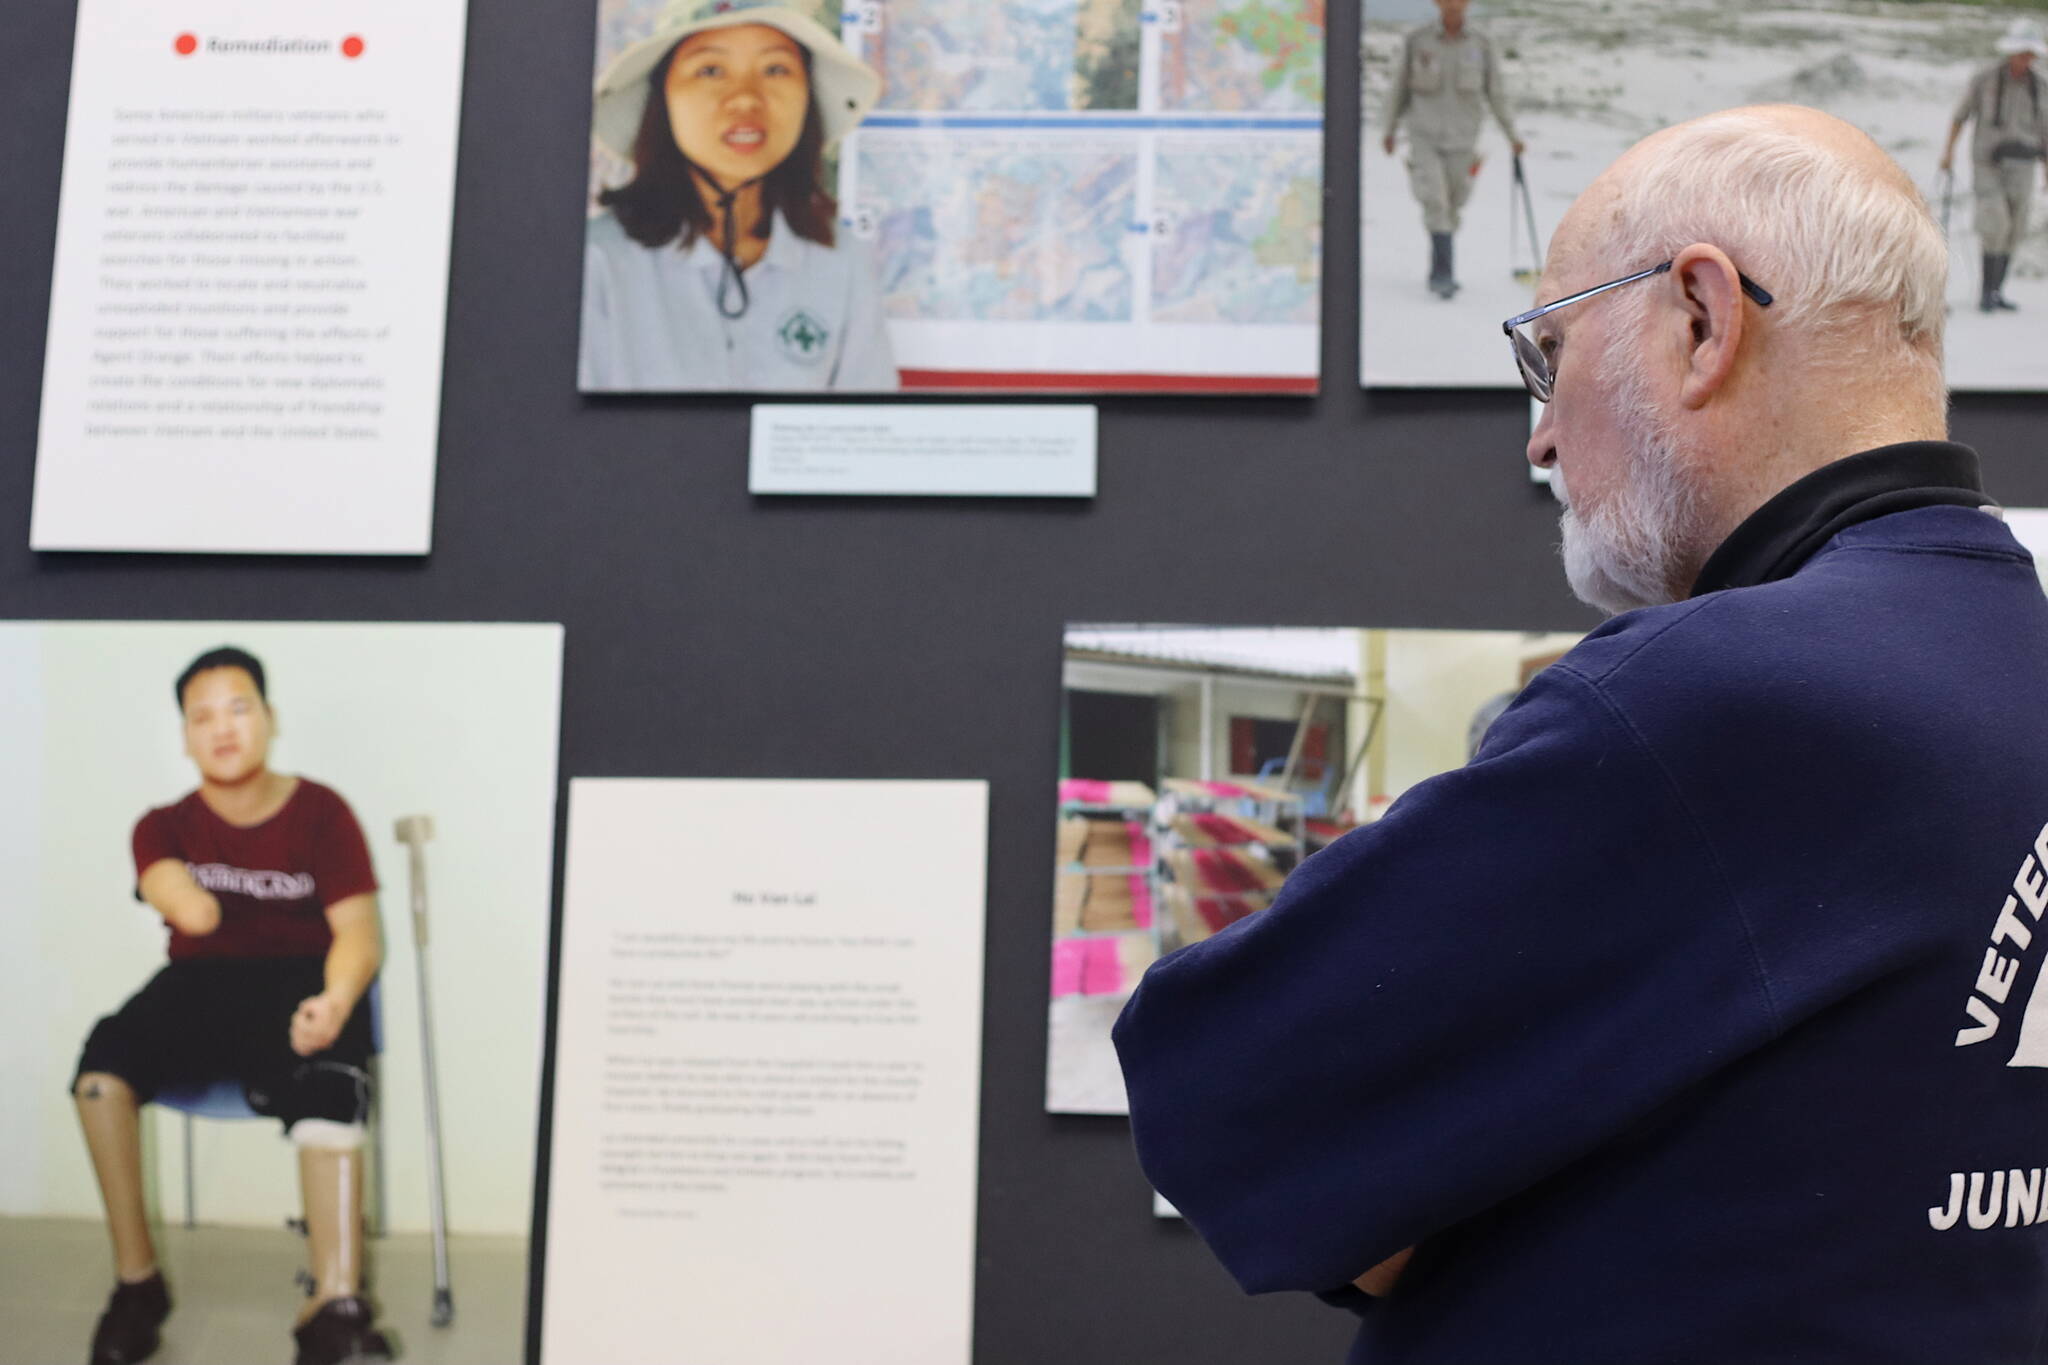 Mark Sabbatini / Juneau Empire 
Don Gotschall, a Juneau resident who served in the military during the Korean War, looks at a display featuring the stories of Vietnamese residents who lost limbs and suffered other injuries as a result of small bombs left by the U.S. during the Vietnam War. The display is part of the exhibit “Waging Peace In Vietnam: The Story of U.S. Soldiers and Veterans Who Opposed the War,” and organizers say there are still hundreds of thousands of such bombs scattered throughout Vietnam today.